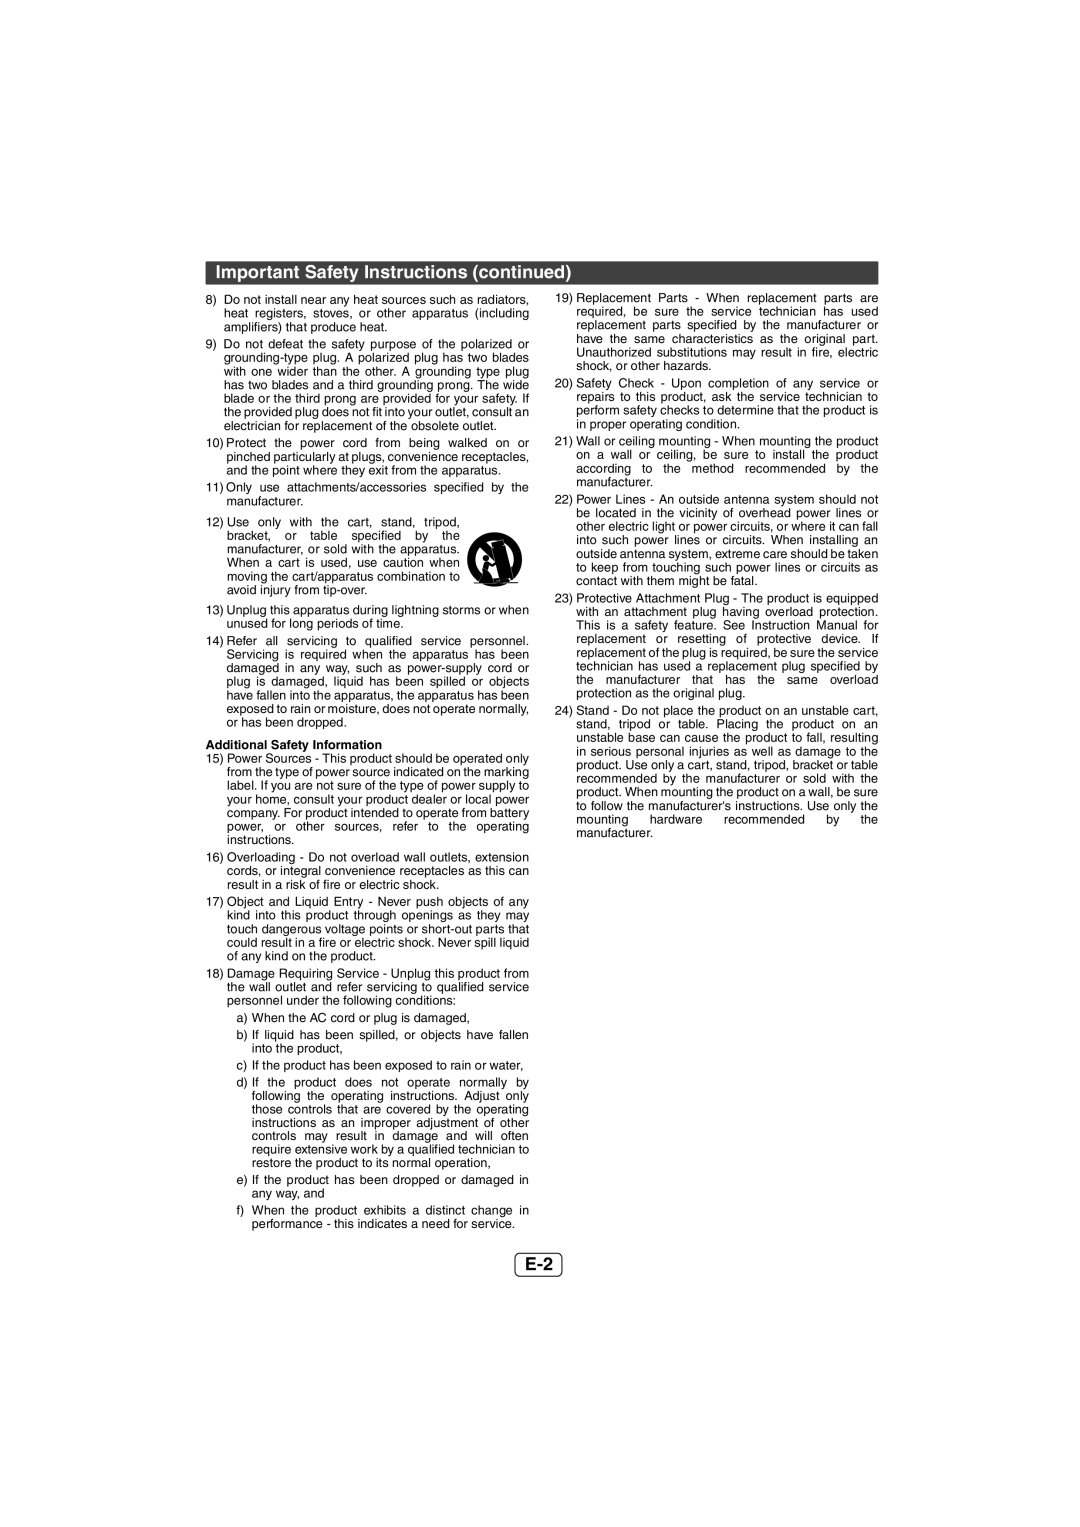 Sharp HTSB600, HT-SB600 operation manual Important Safety Instructions continued 